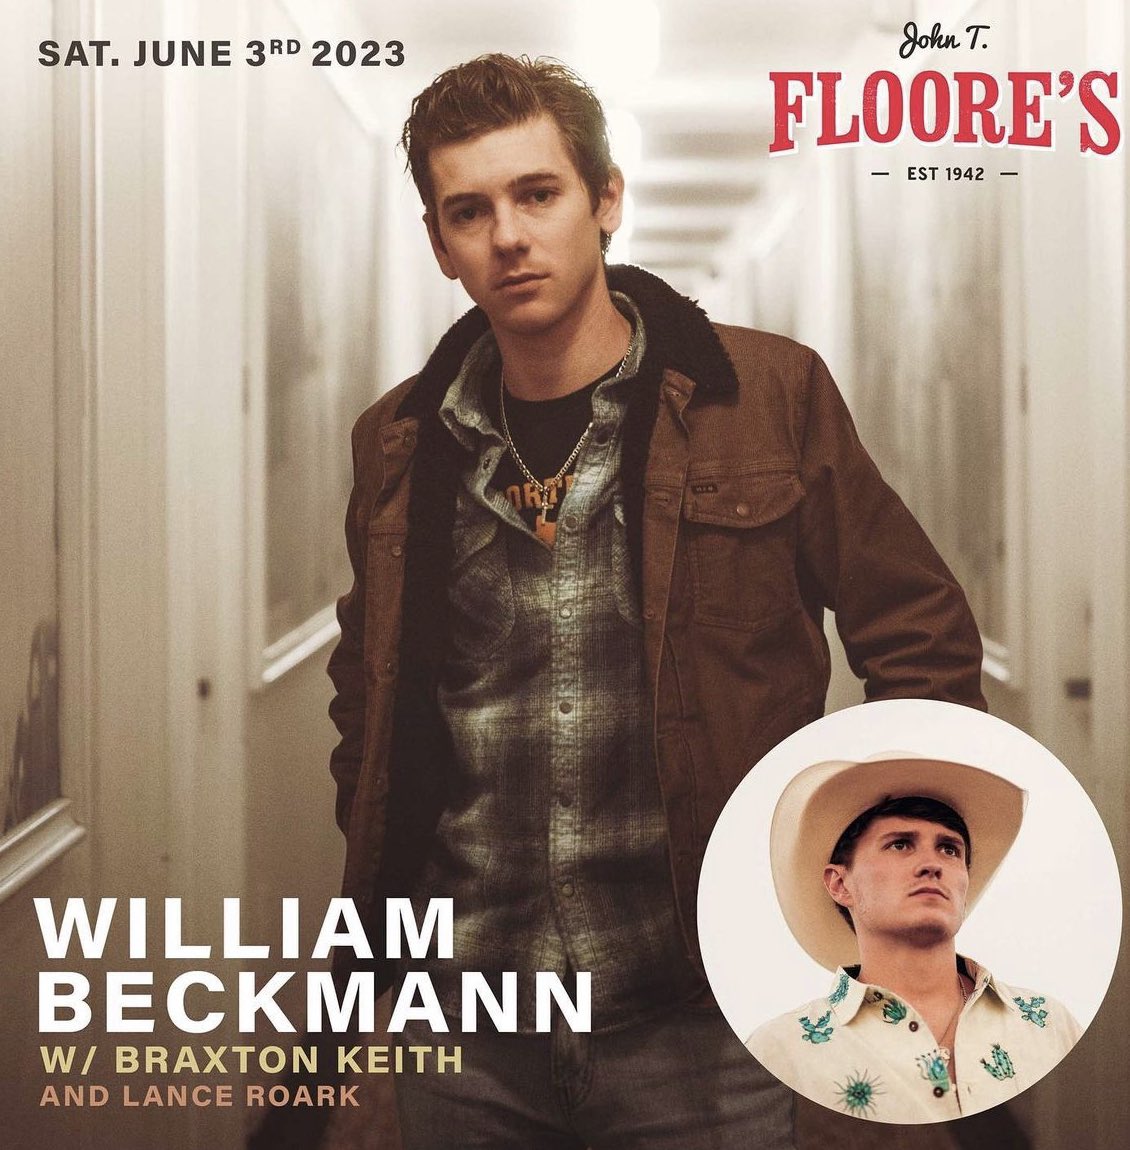 One week away!! Don’t miss @TheWillBeckmann with special guests @thebraxtonkeith and Lance Roark on our outdoor stage! Next Saturday June 3rd! Tickets here: bit.ly/3N1qv7q